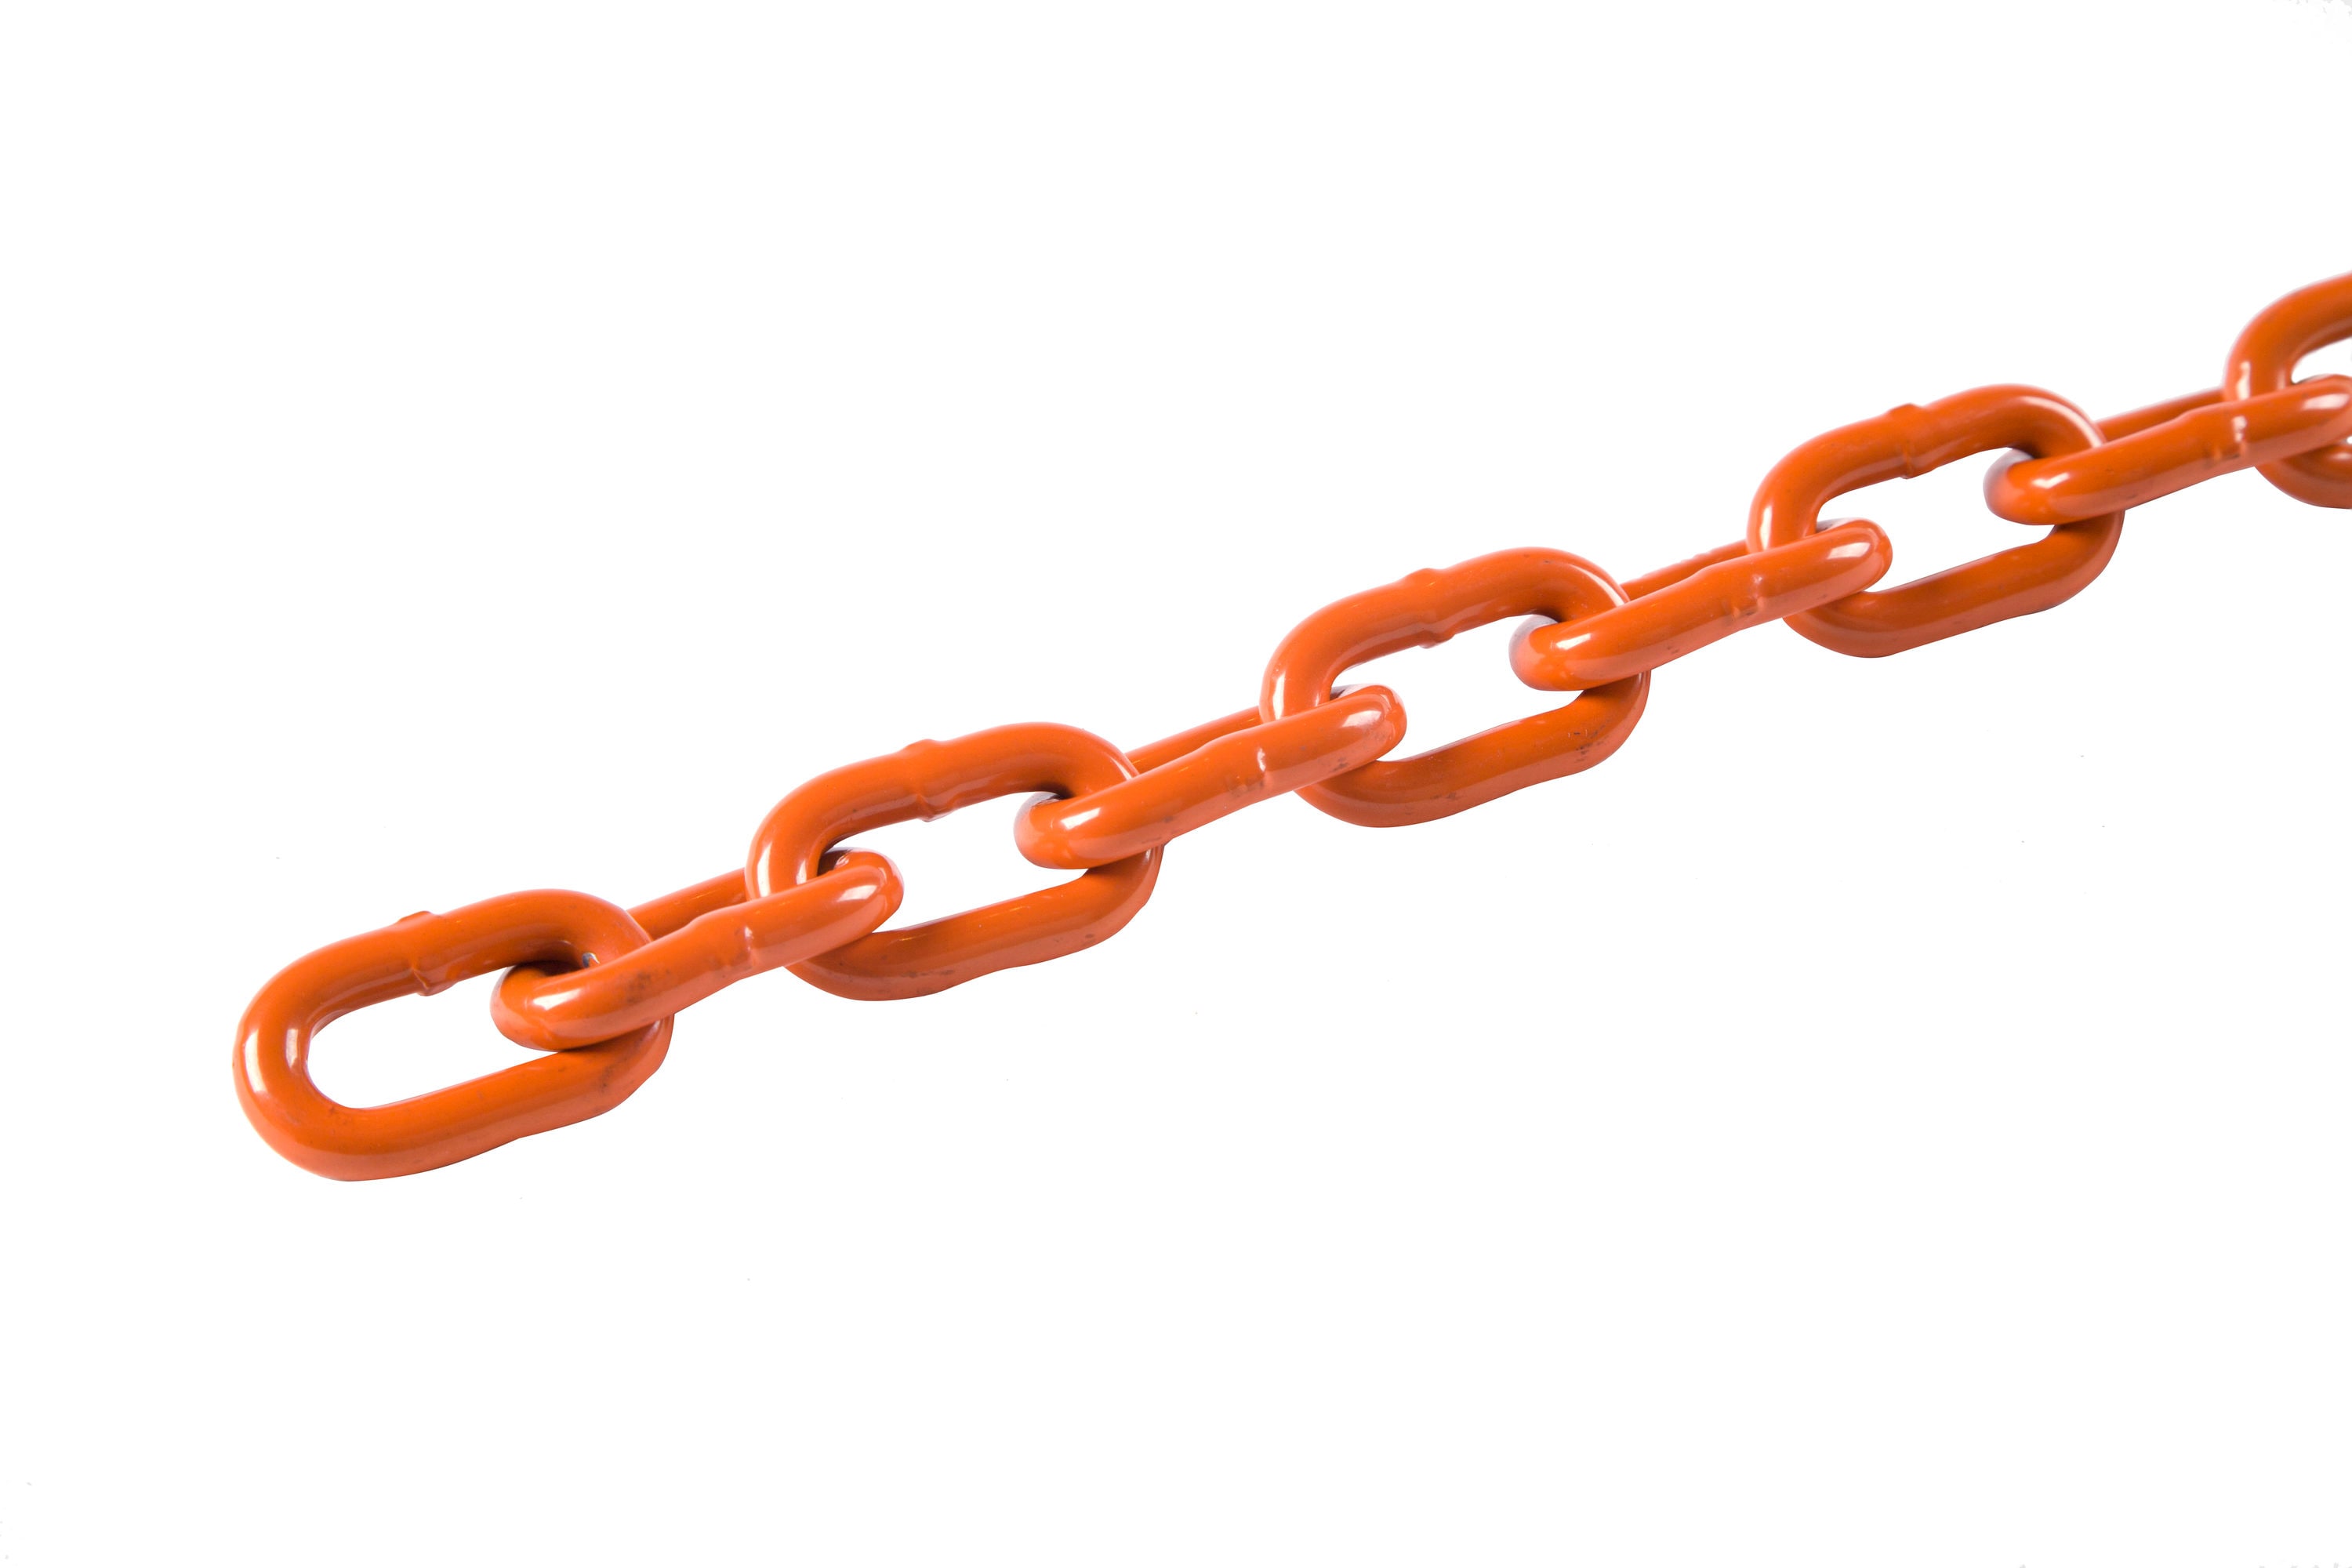 Mr. Chain, The Leading U.S. Manufacturer of Plastic Barrier Chain